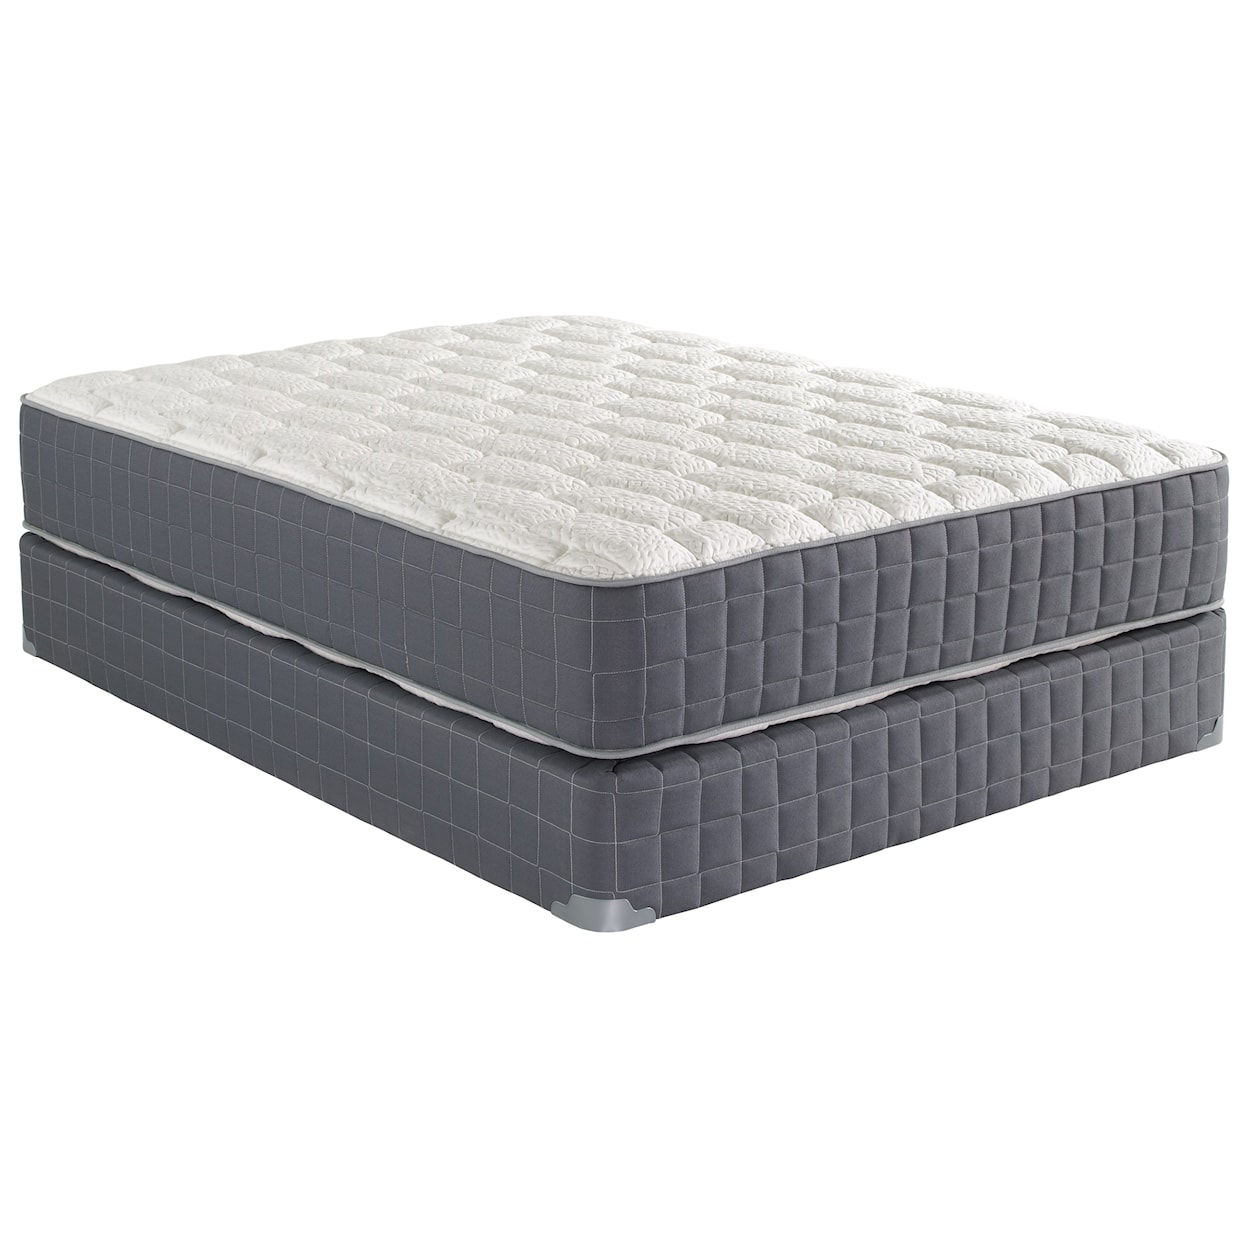 Spring Air Heritage I King 12" Two Sided Mattress Set